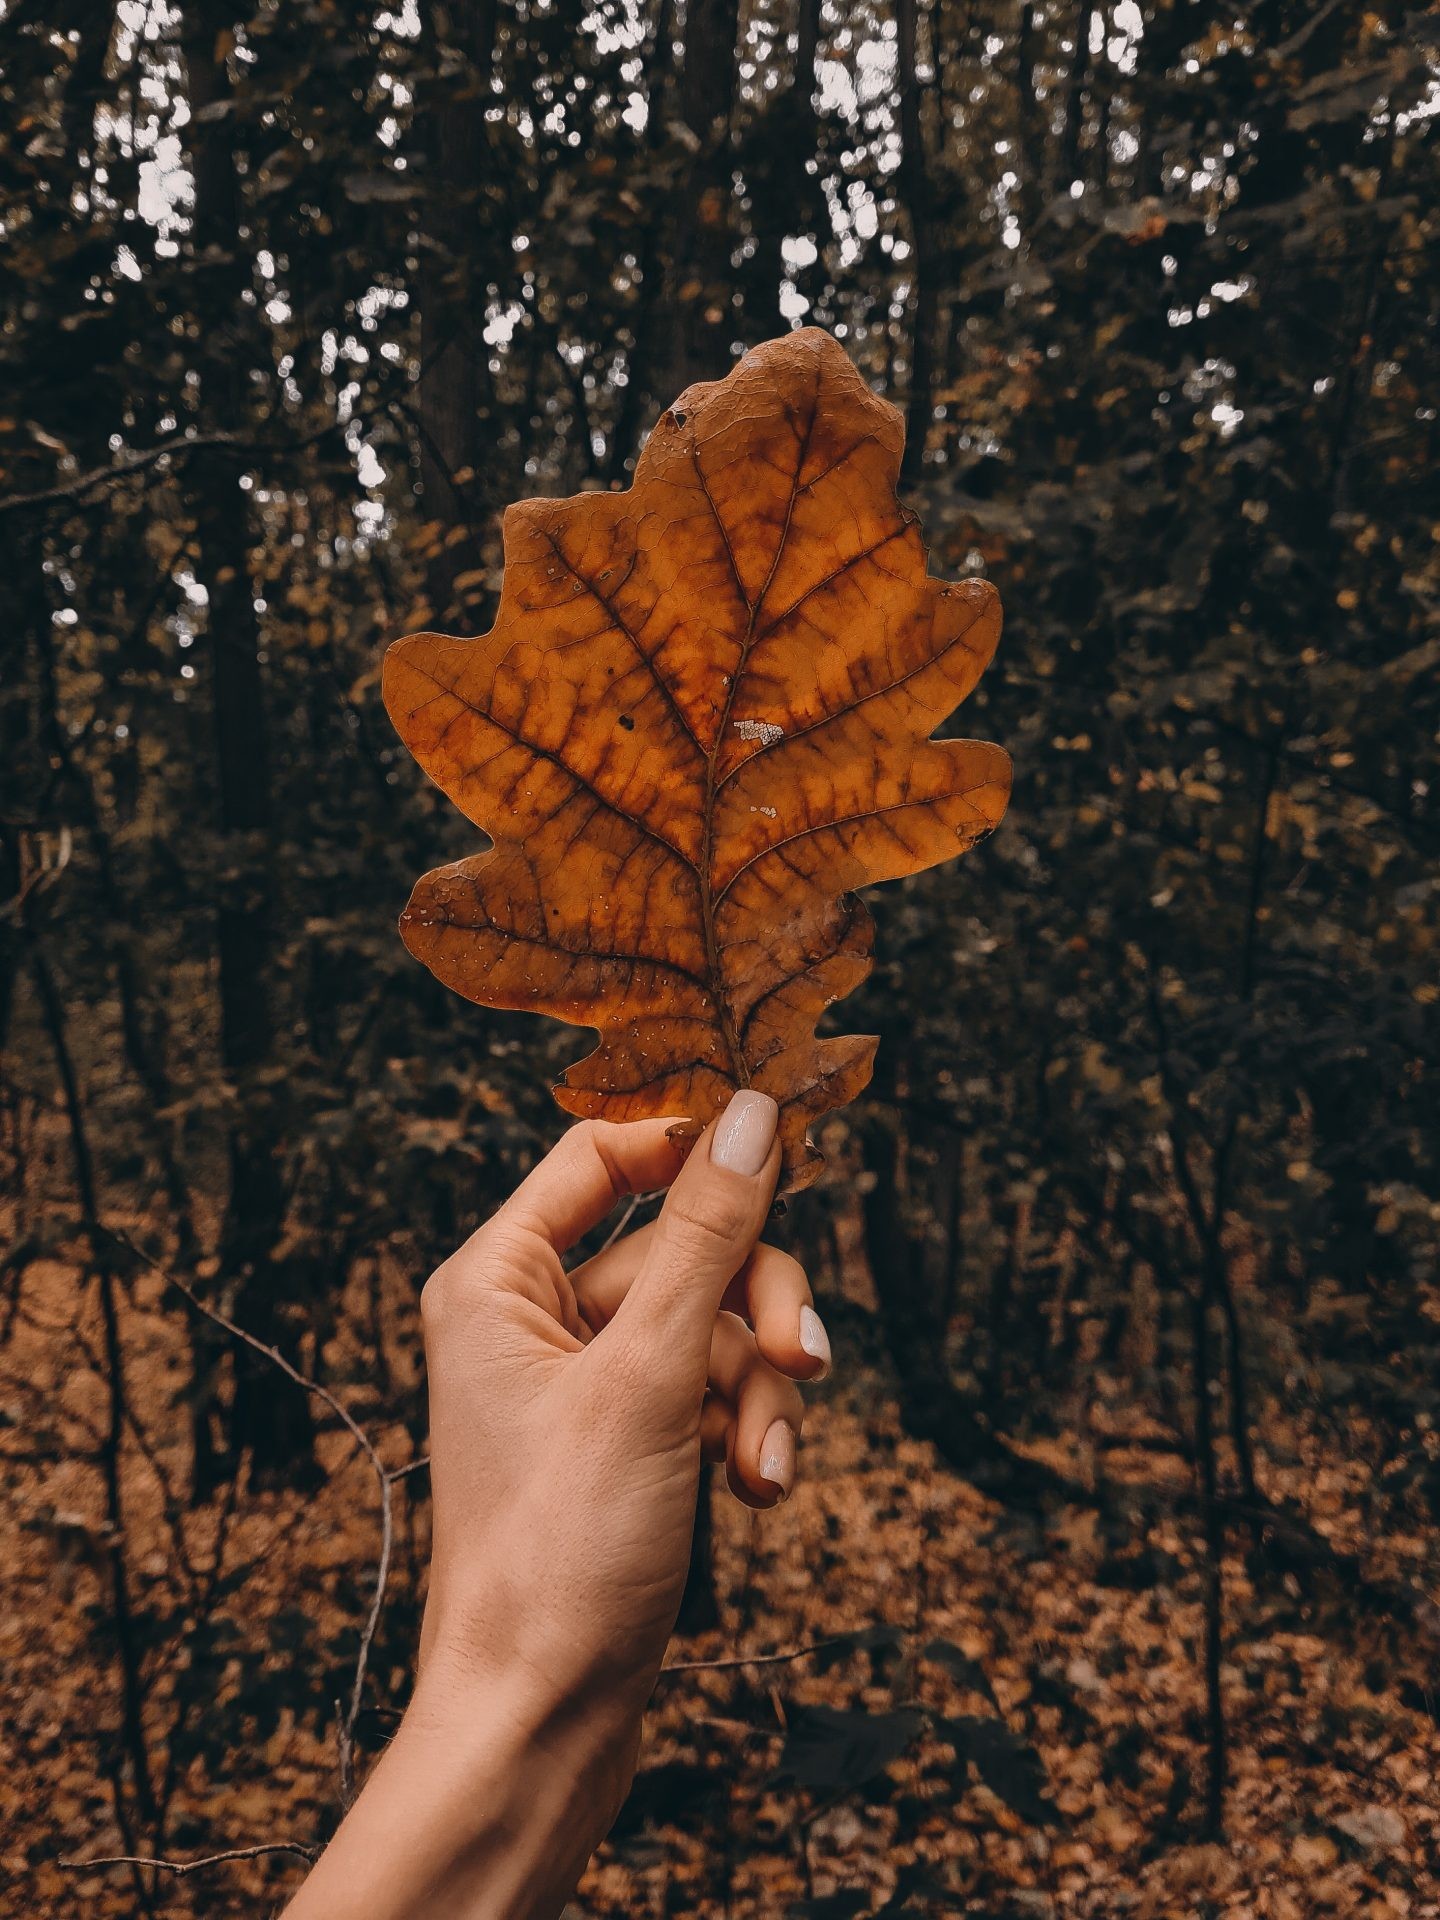 Fall Trees Tumblr Wallpapers